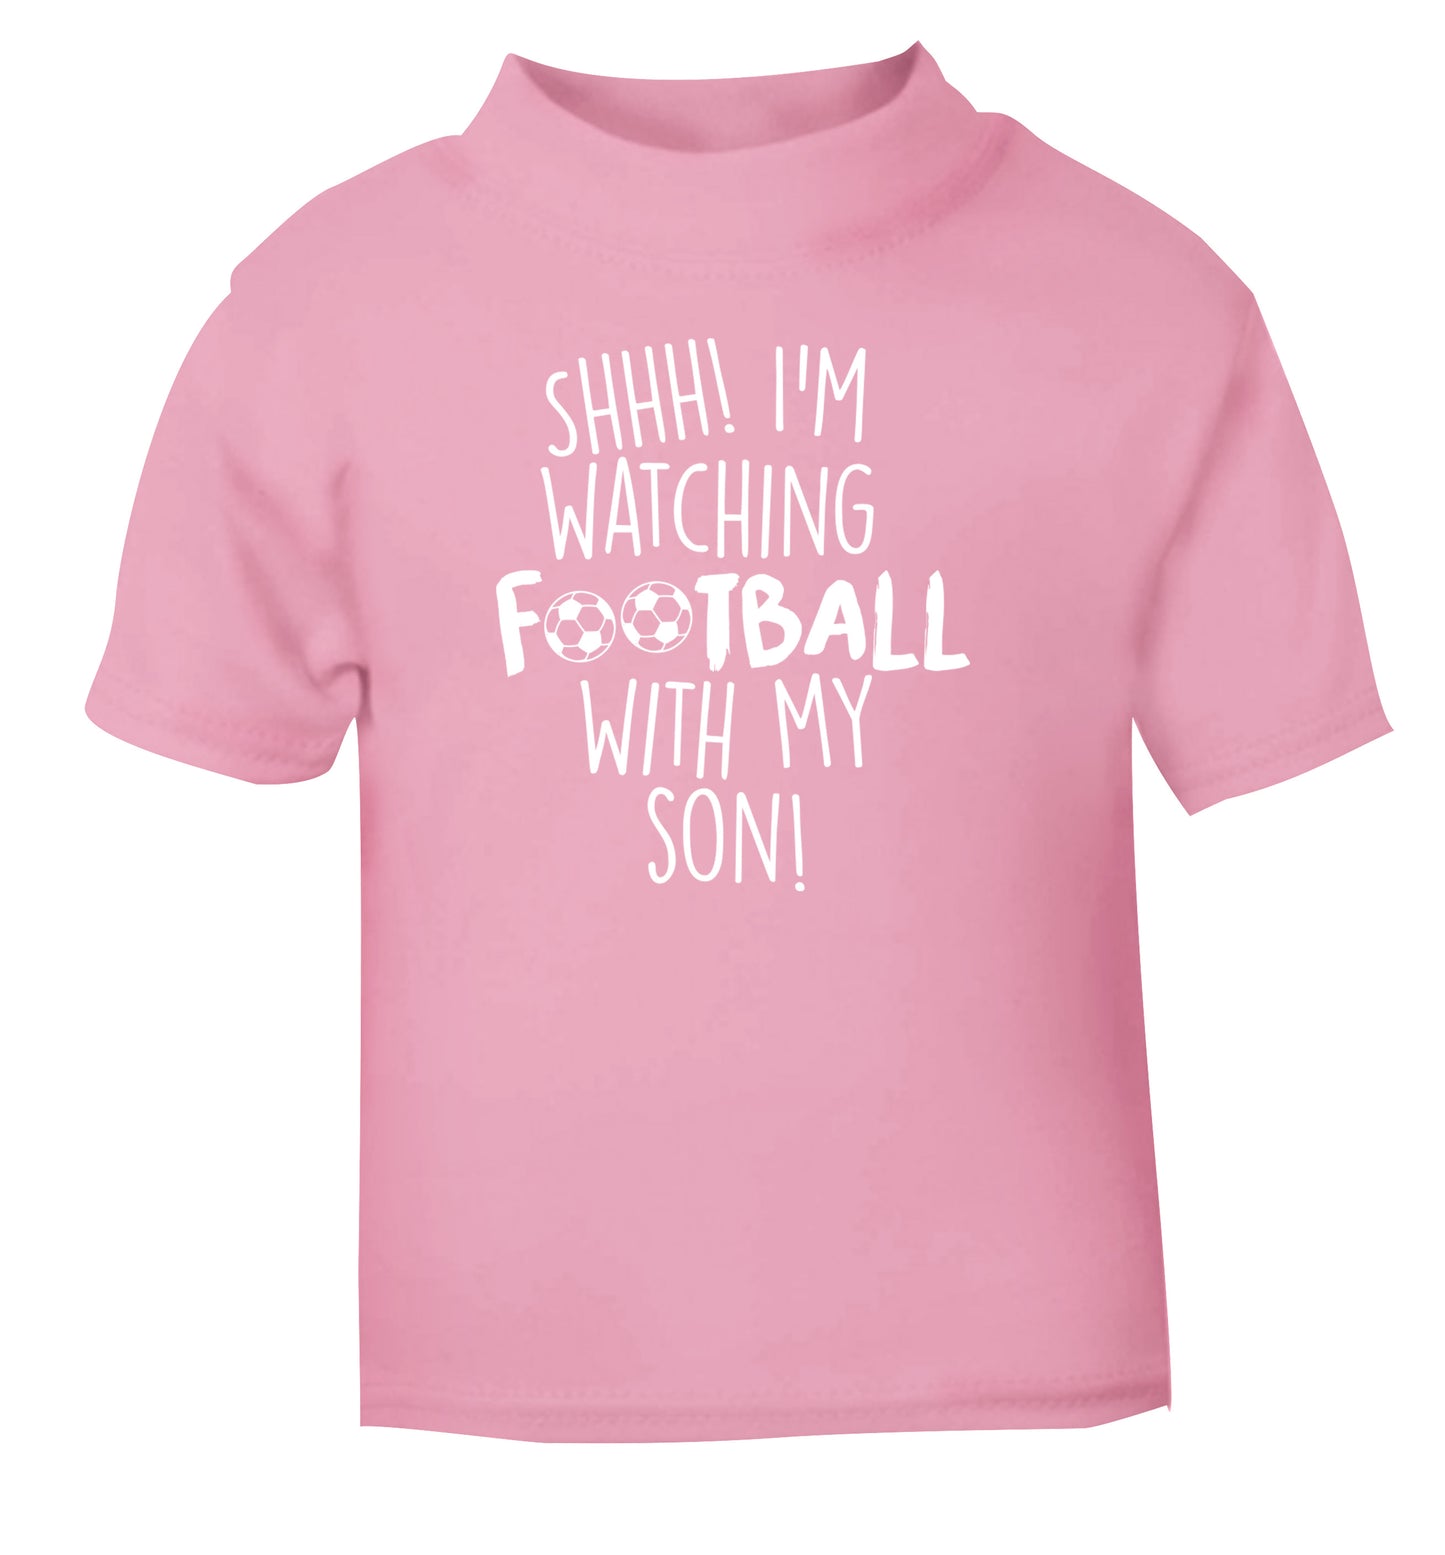 Shhh I'm watching football with my son light pink Baby Toddler Tshirt 2 Years